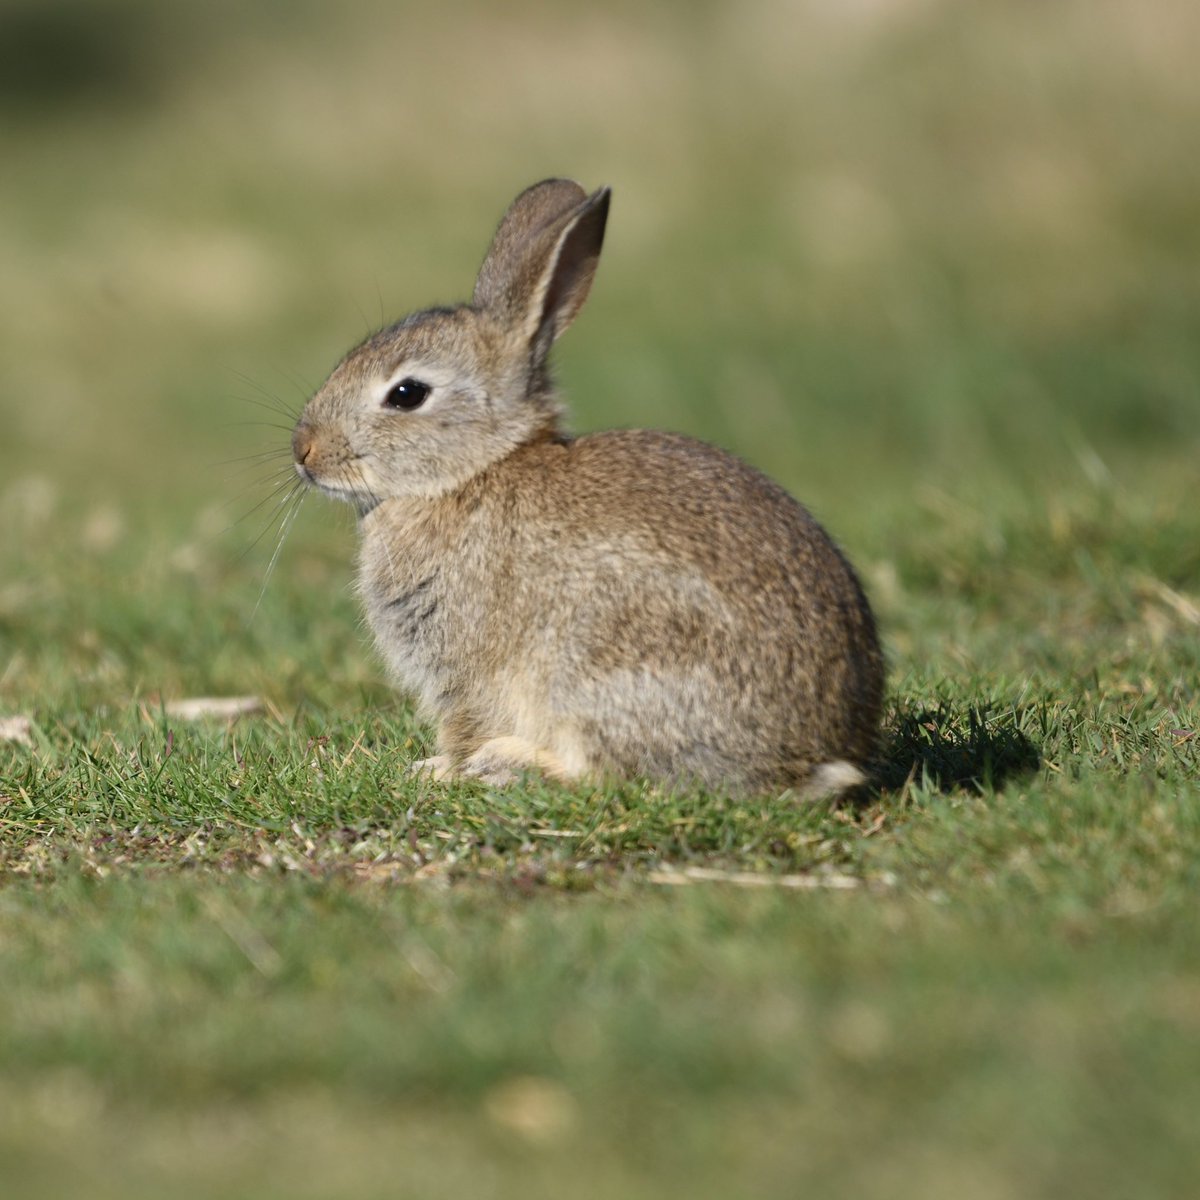 First rabbit pictures of the year in #bushpark yesterday, the rabbits there are not so shy especially in the Pheasantry so much activity in the park with the skylarks, and all the young appearing.

#TwitterNatureCommunity #TwitterNaturePhotography #beautiful #nature #rabbits